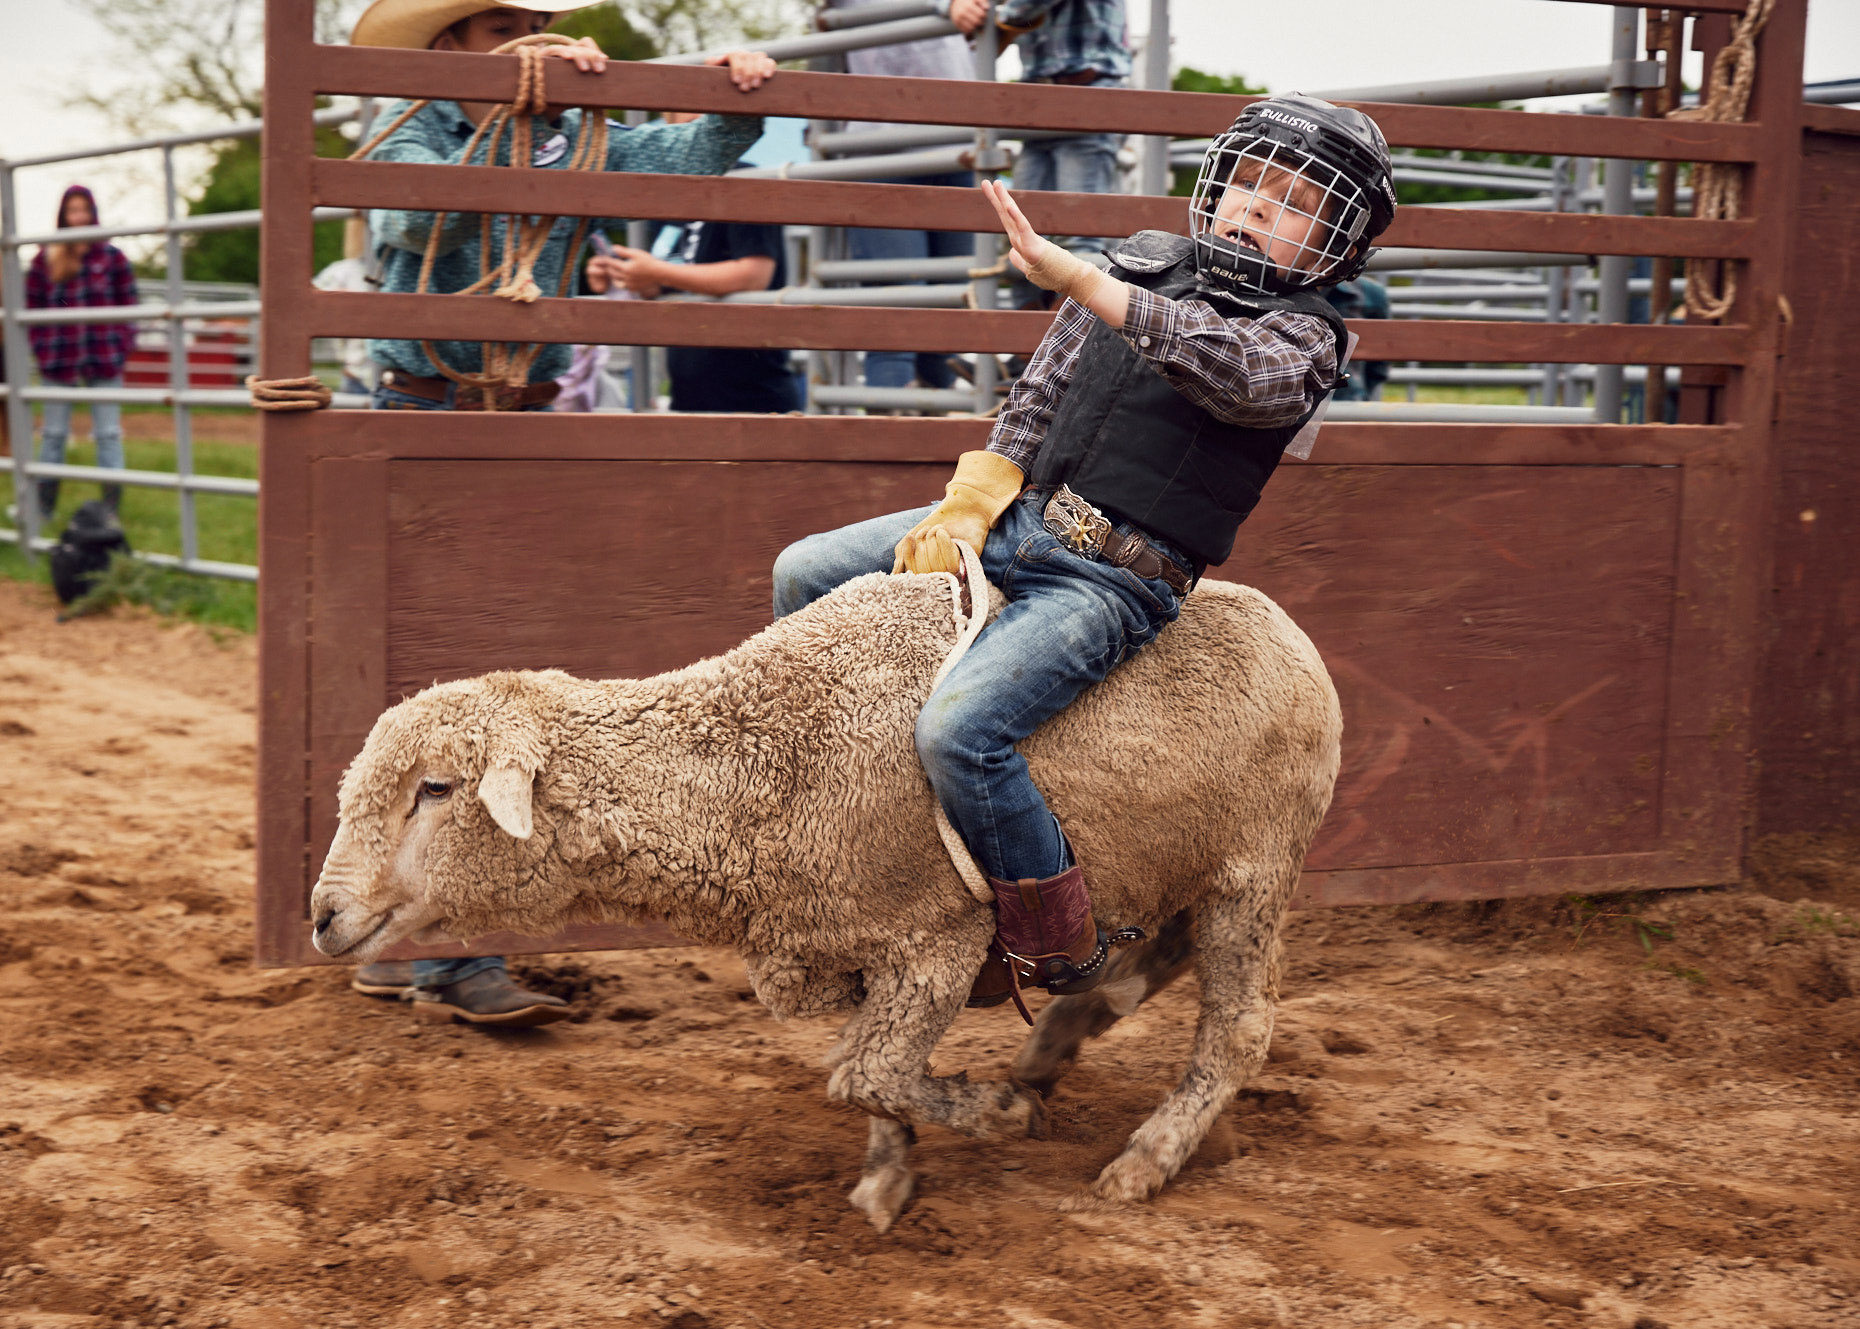 Fearfl boy riding a sheep at rodeo | lifestyle photography by Saverio Truglia